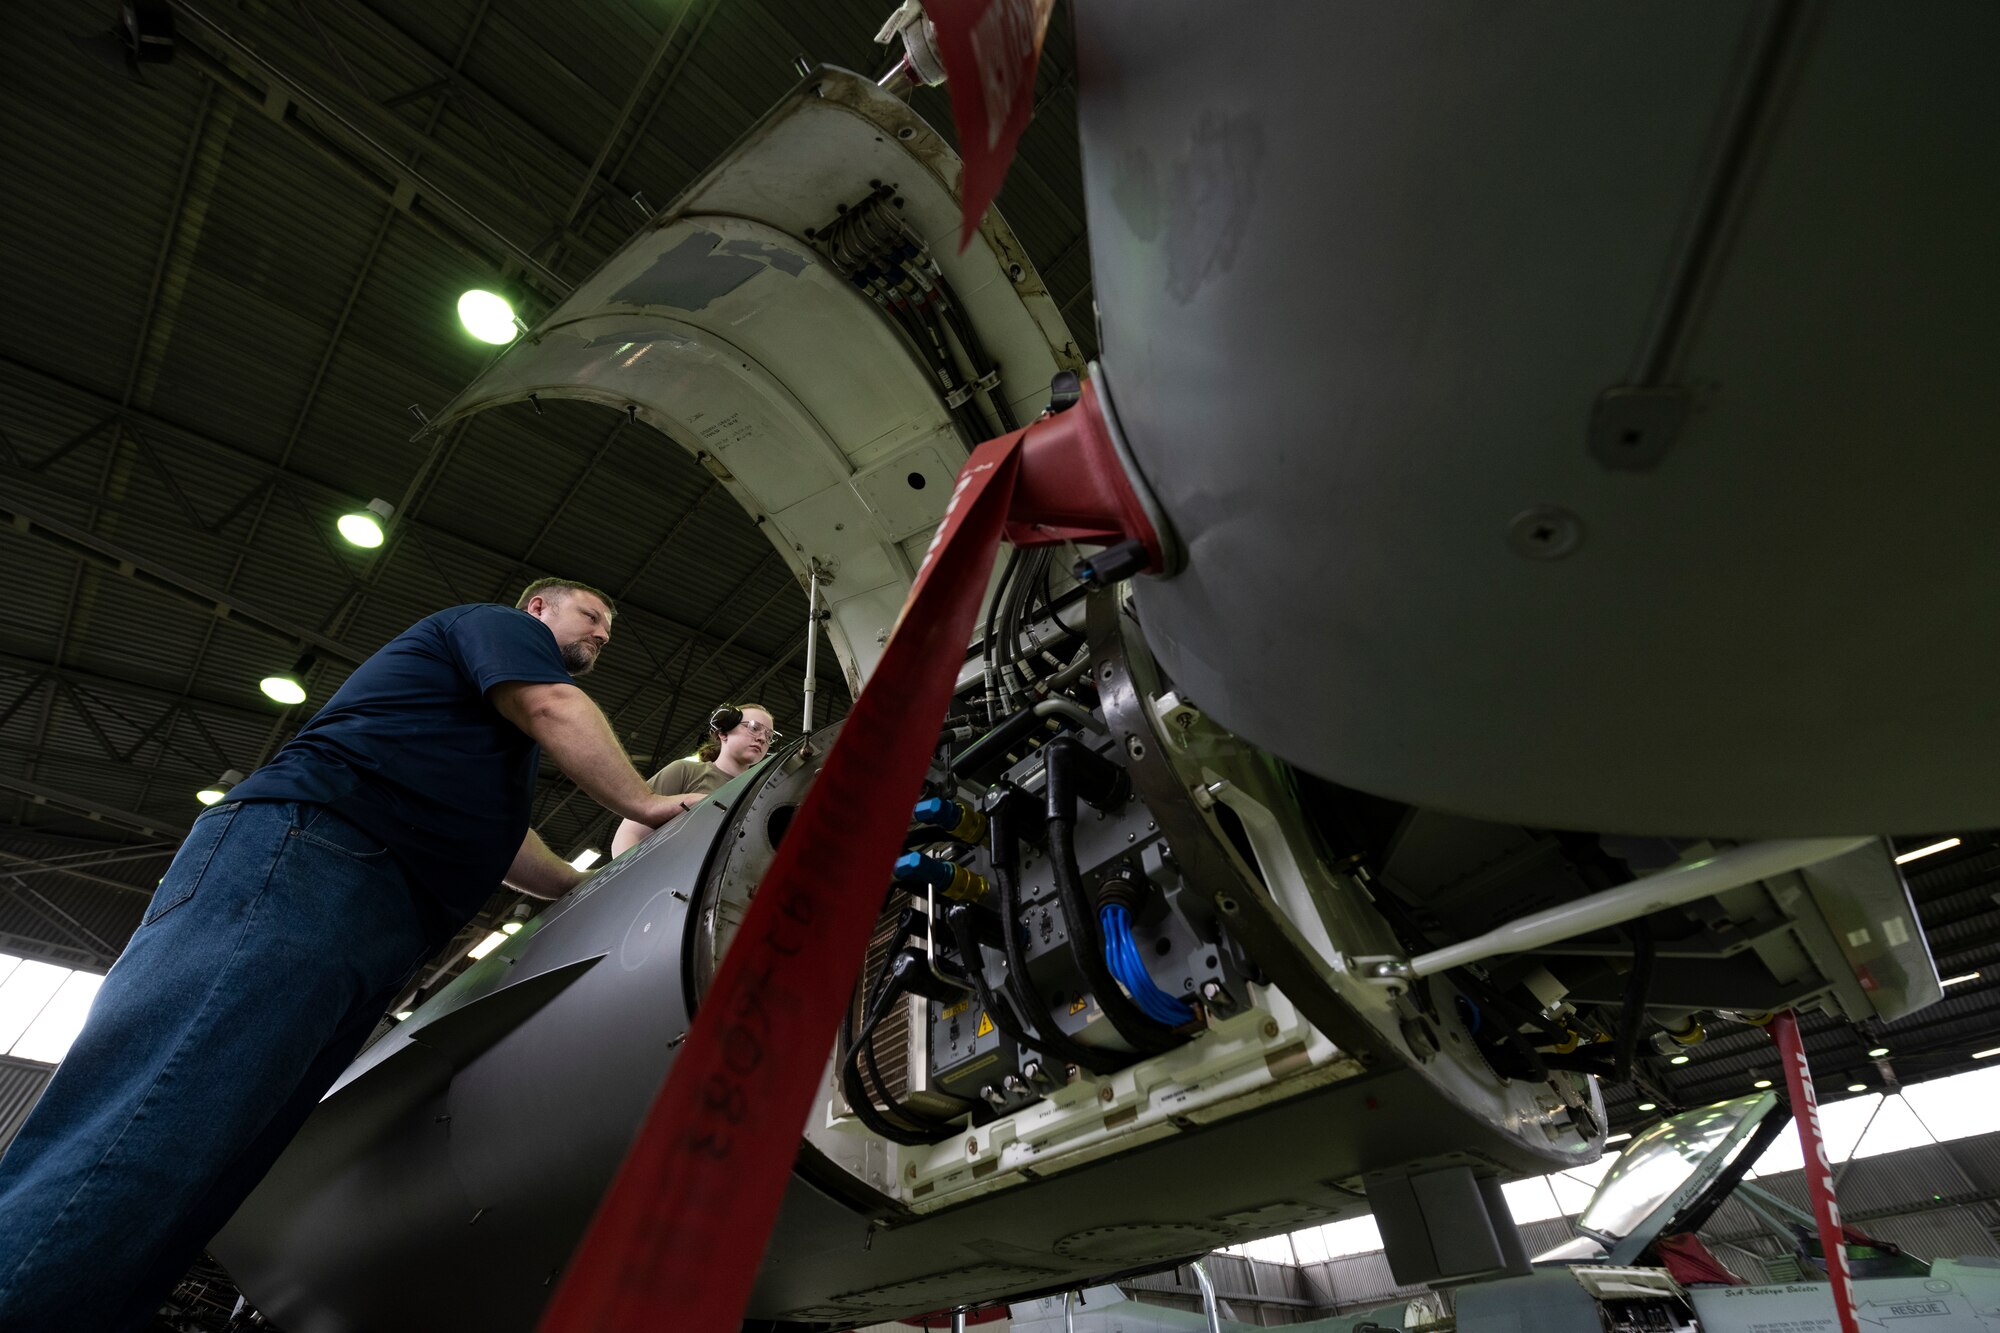 U.S. Air Force Airman performs maintenance on an F-16C Fighting Falcon.